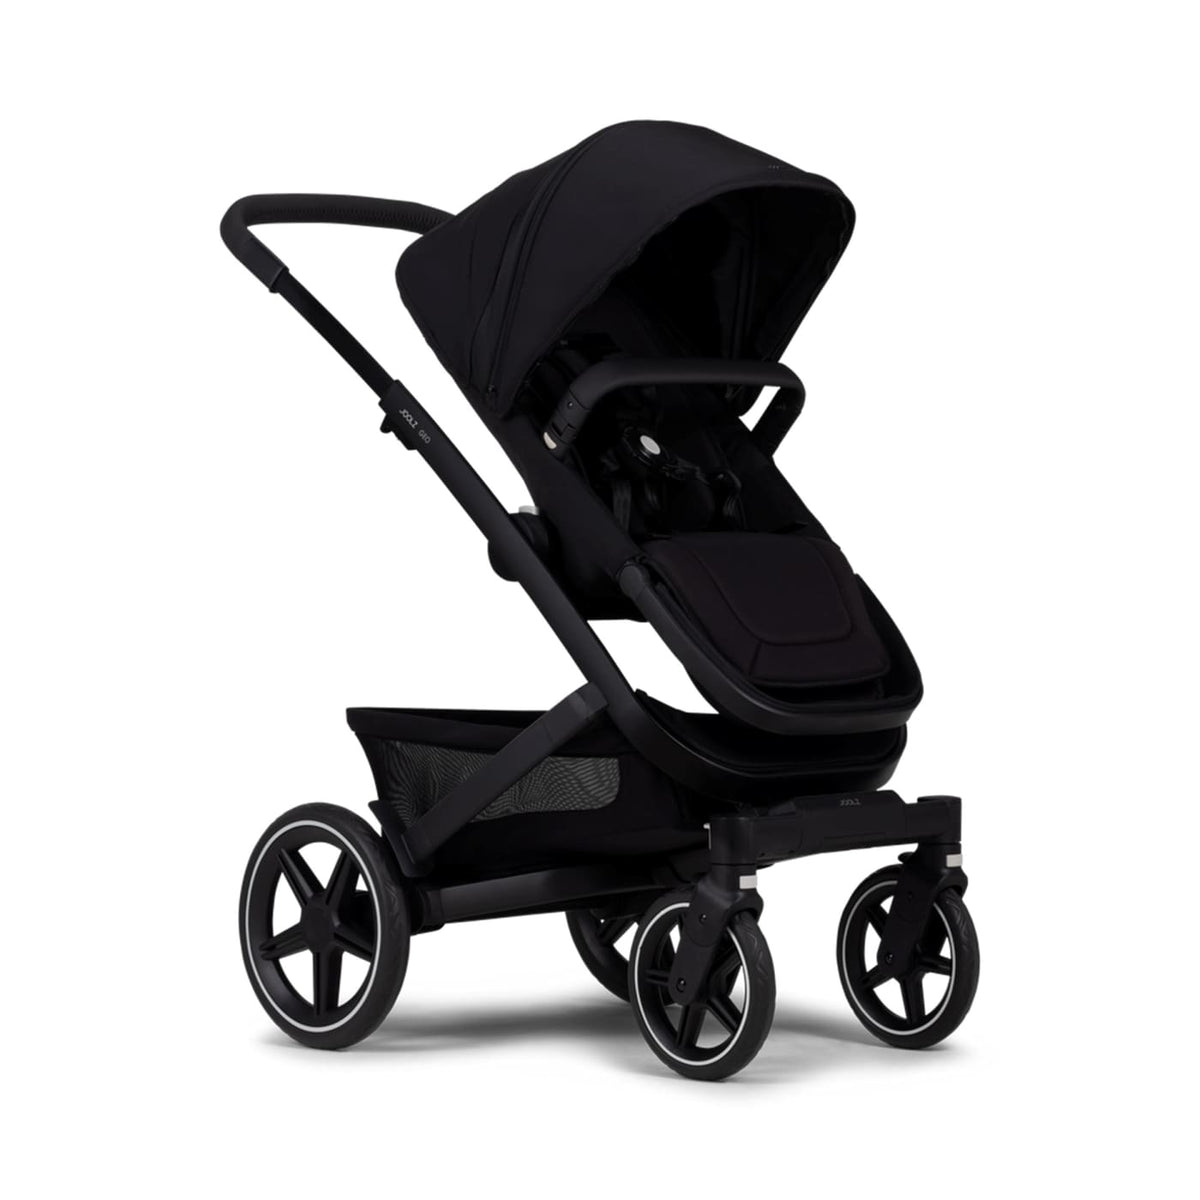 Joolz Geo3 Duo Stroller - Brilliant Black (2 Seat + 1 Carry Cot) - PRAMS &amp; STROLLERS - PACKAGES